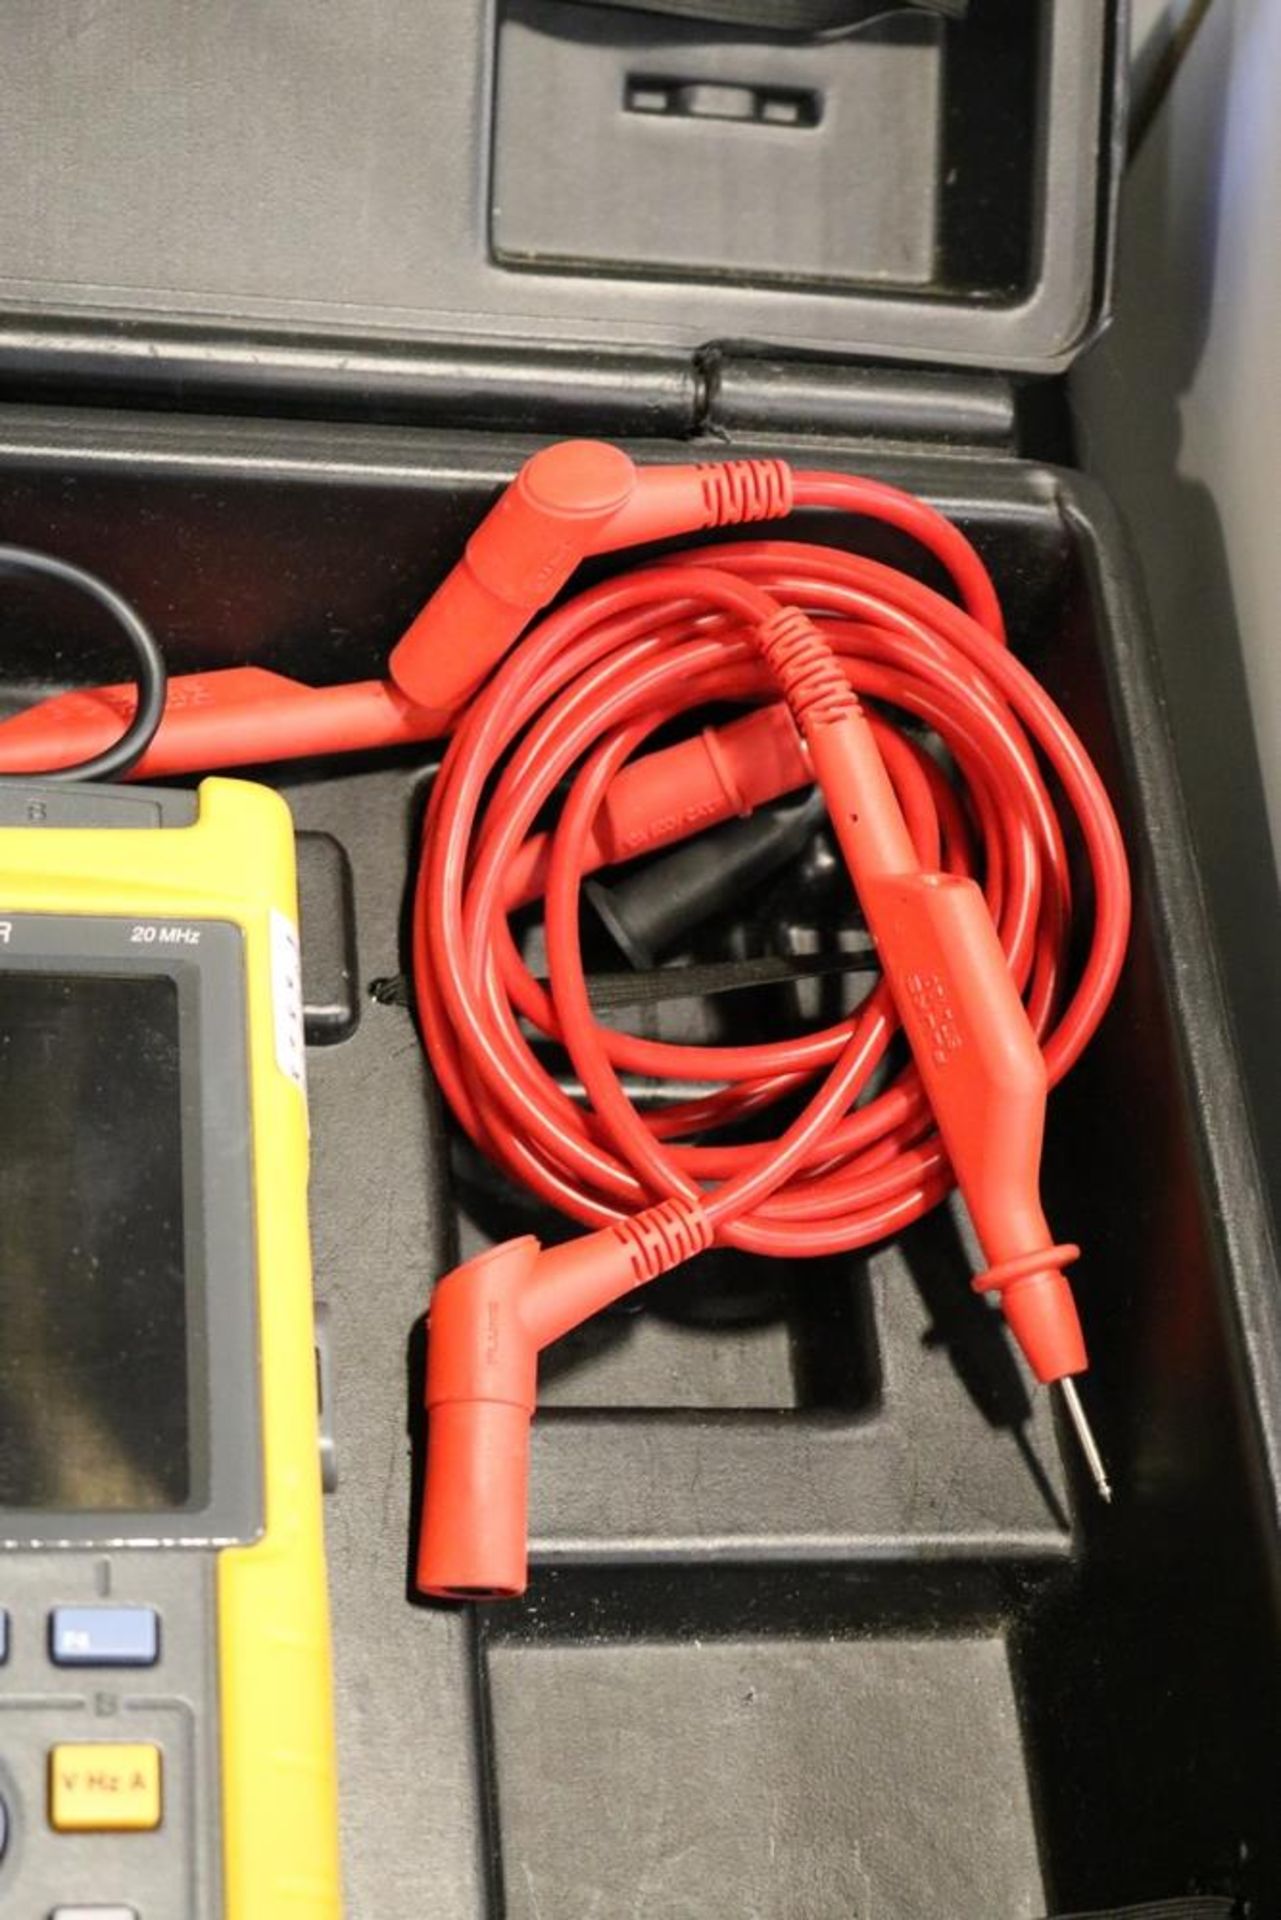 Fluke 123 Scope Meter in Case with Accessories - Image 6 of 7